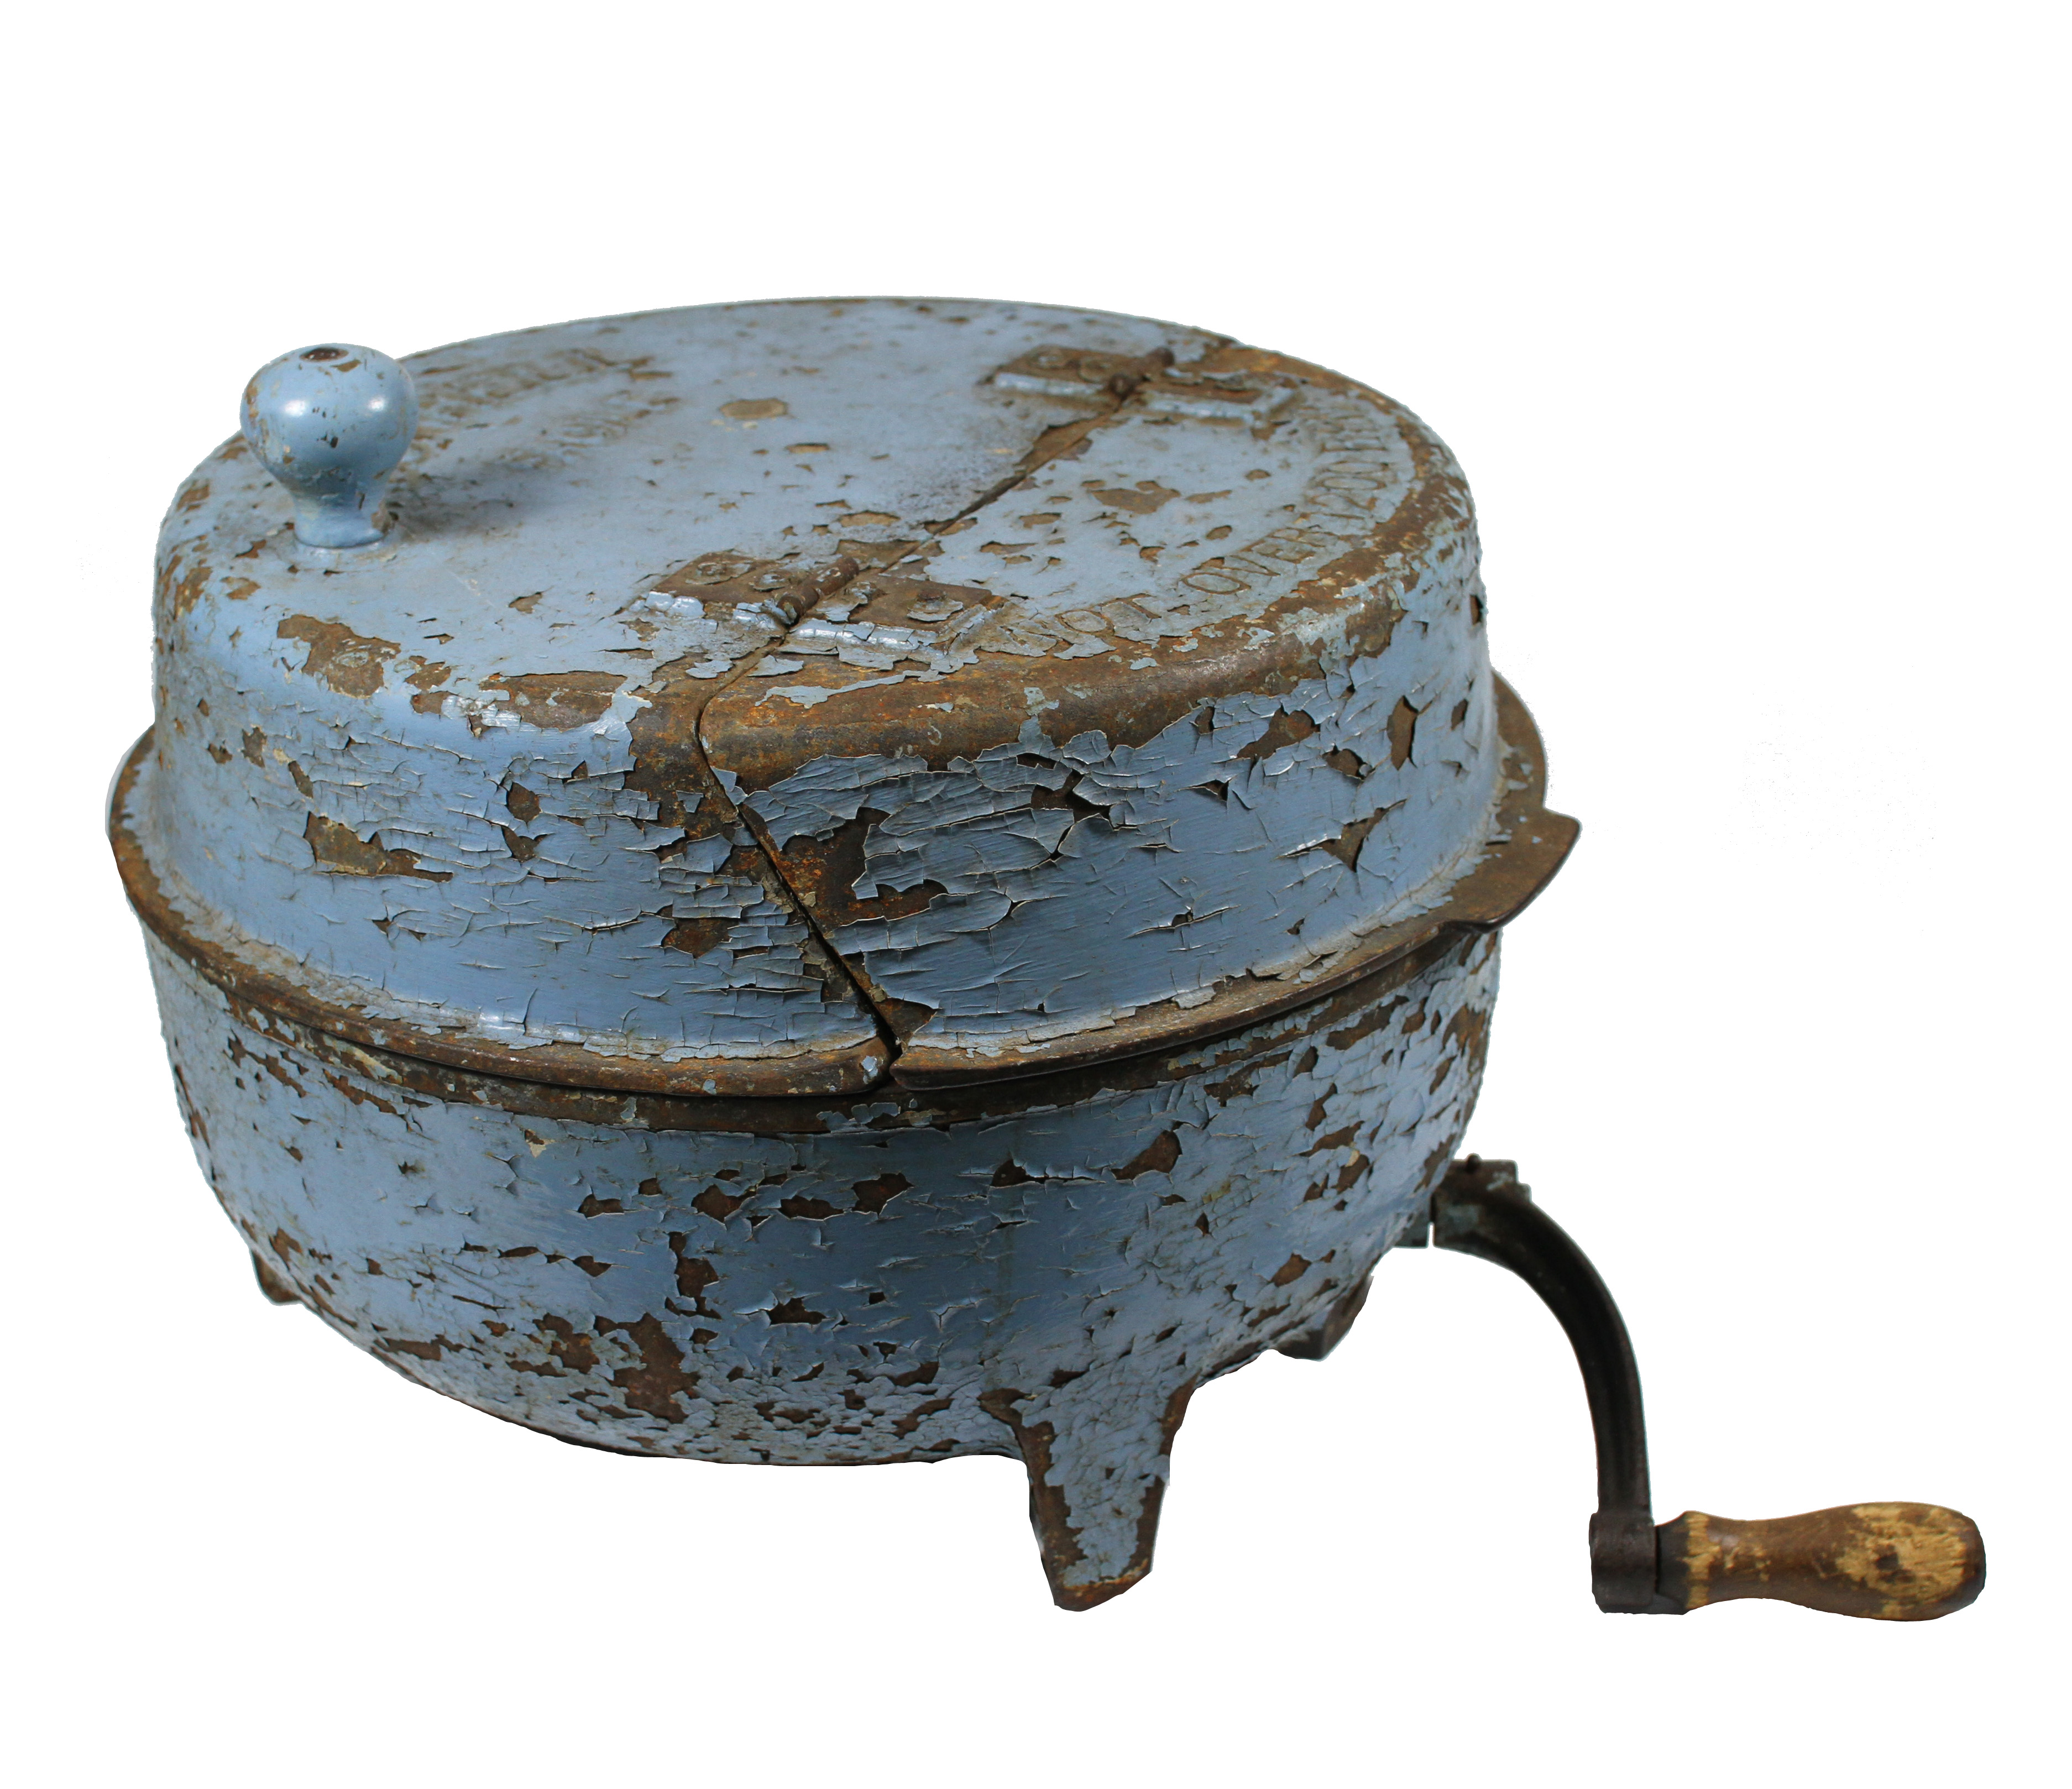 Centrifuge for fat testing. Metal, cast iron, metal, copper and glass. 41 x 18 cm. © CSA